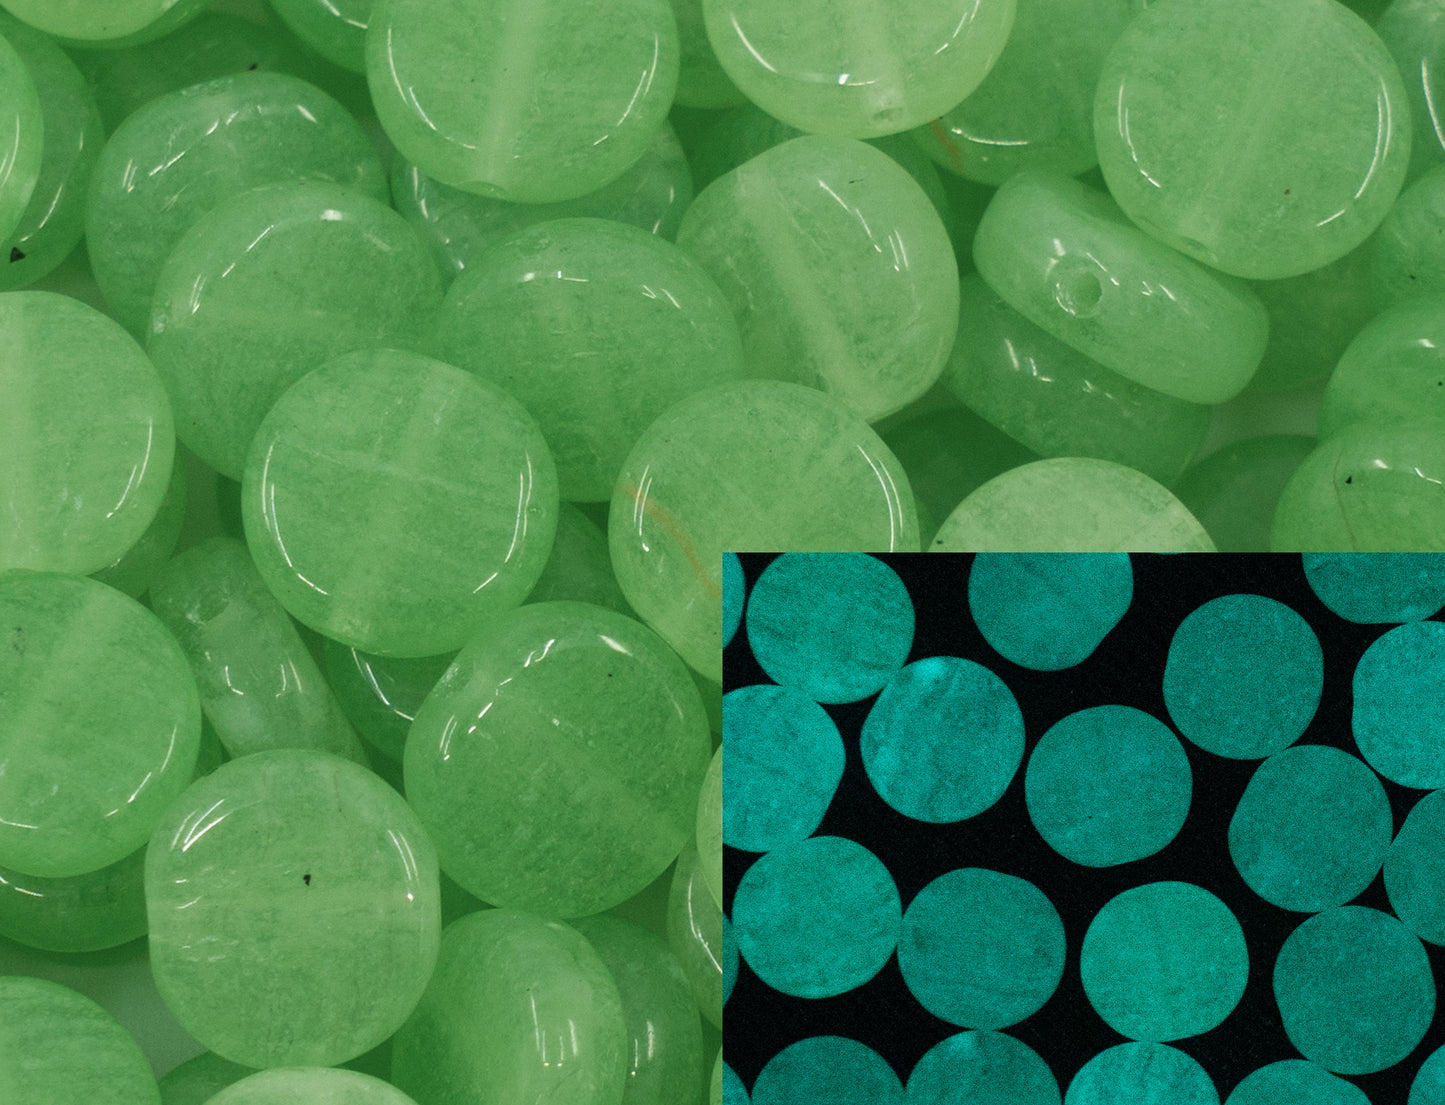 Flat Round Coin 1-hole glass beads, 8mm, Czech Republic, Dirty Bright Green - Glow in the Dark Bright Blue